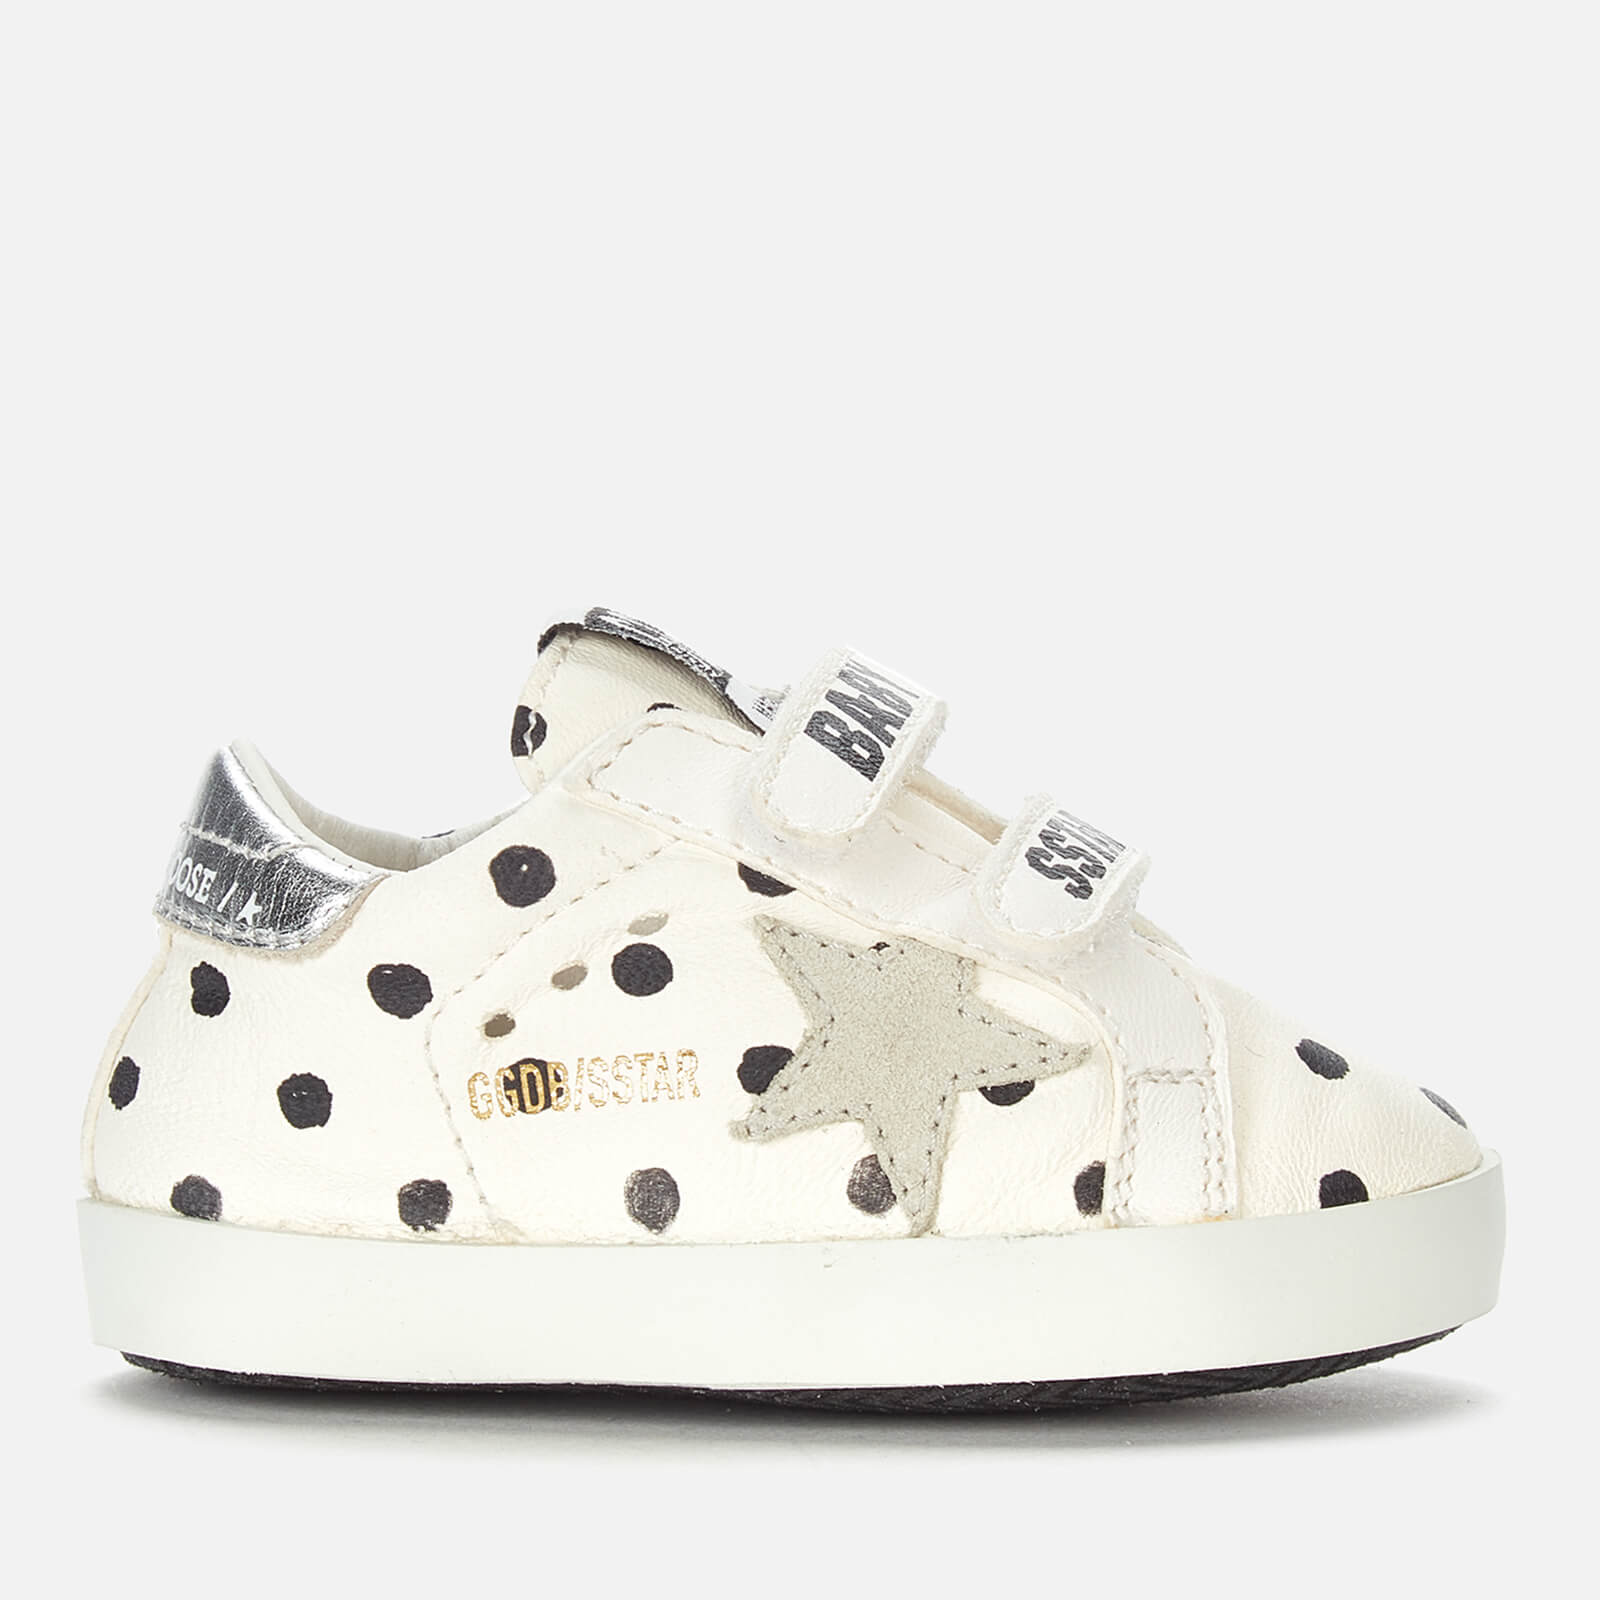 Golden Goose Deluxe Brand Babies' School Pois Print Trainers - White/Black Pois/Ice/Silver - UK 1 Infant